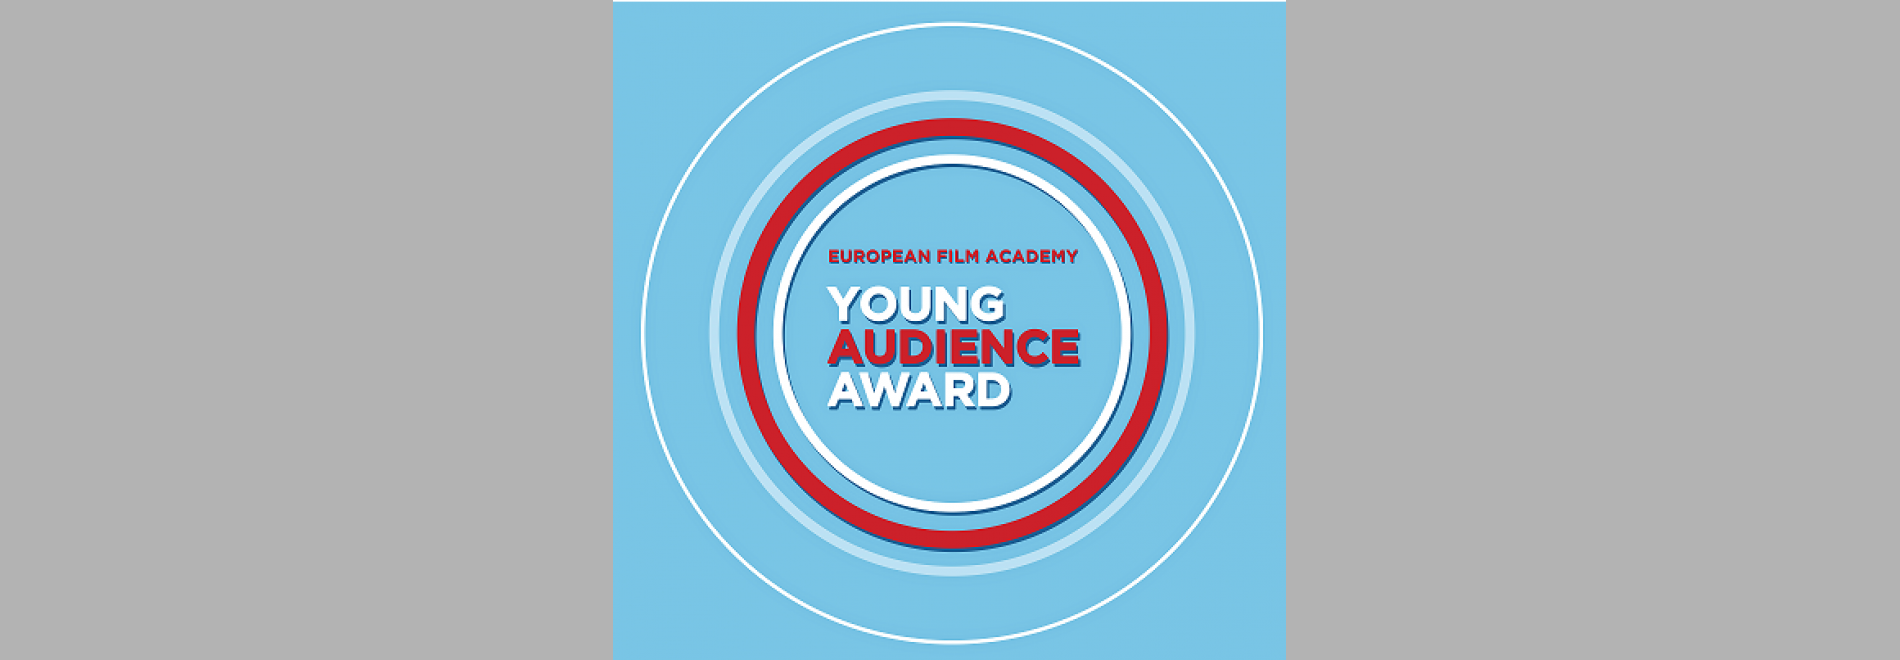 Young Audience Award